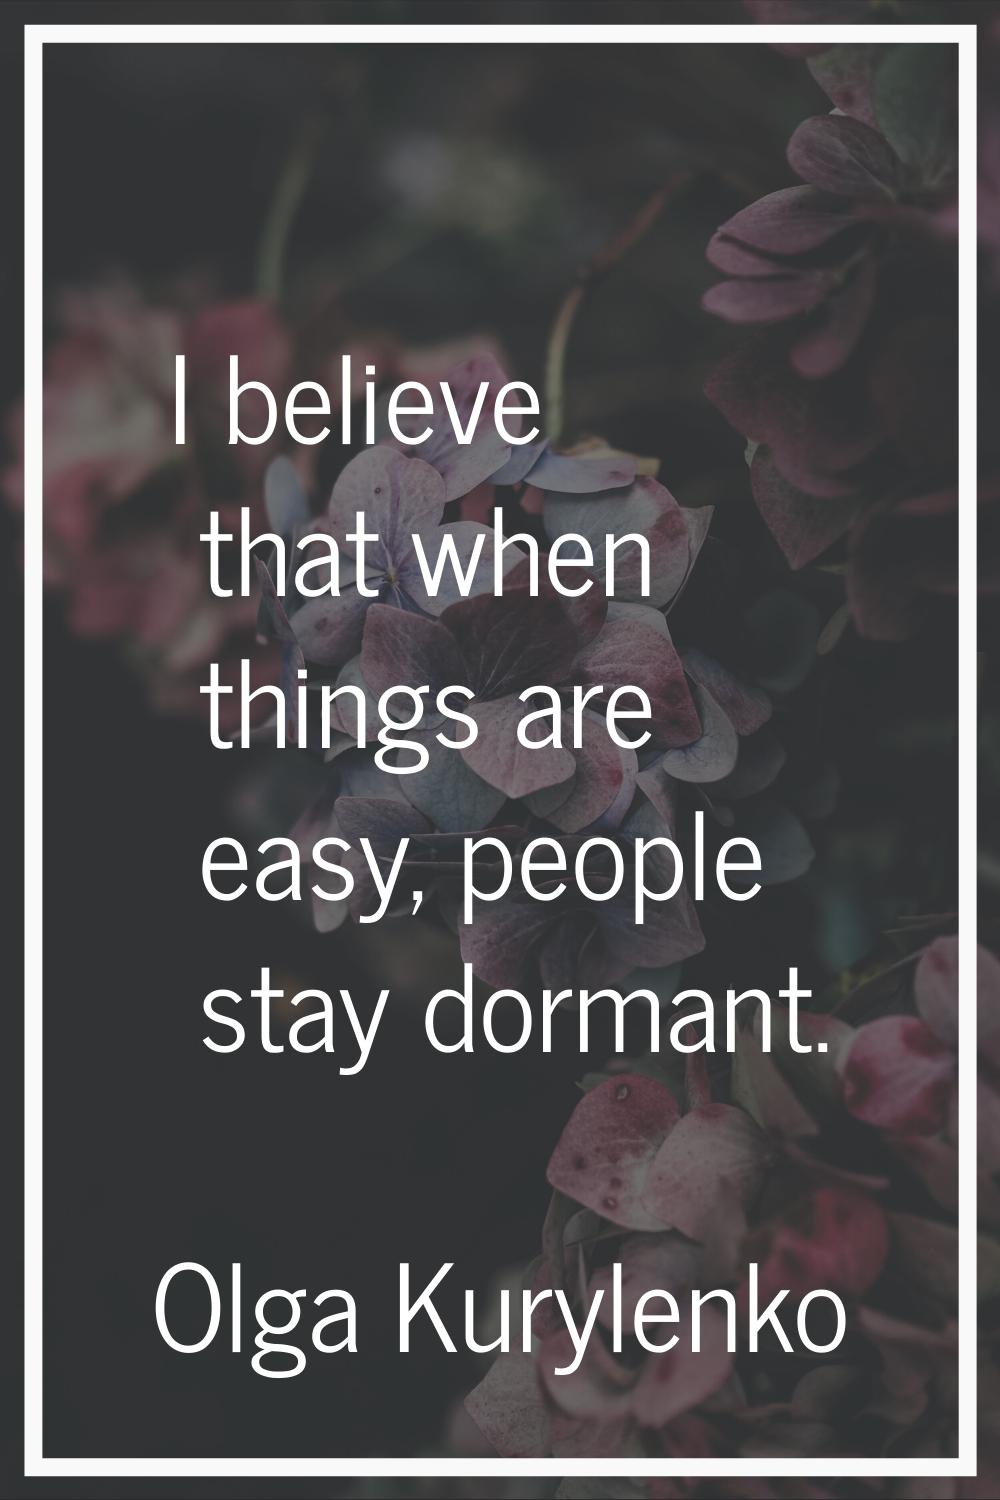 I believe that when things are easy, people stay dormant.